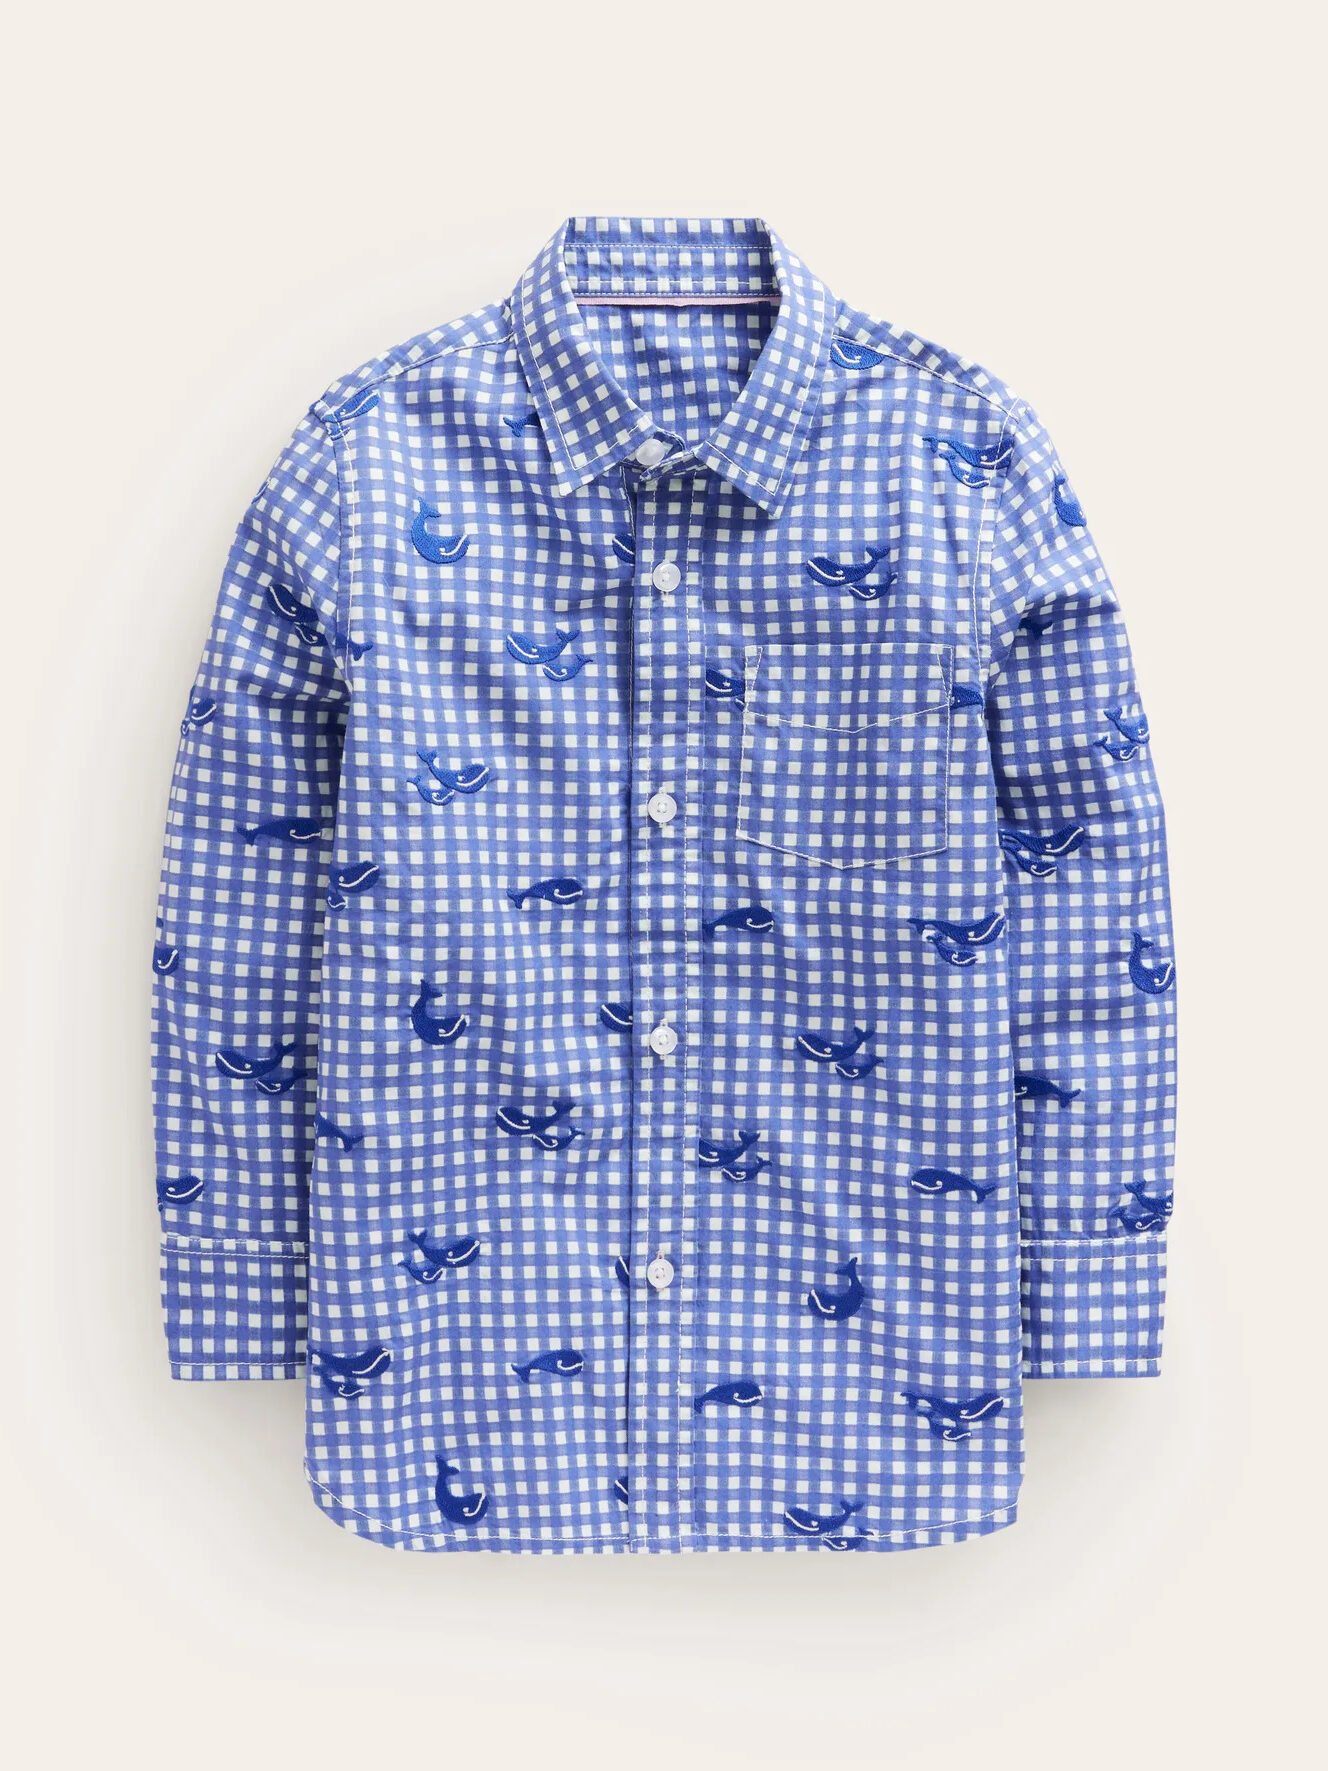 A blue shirt with white and blue birds on it.